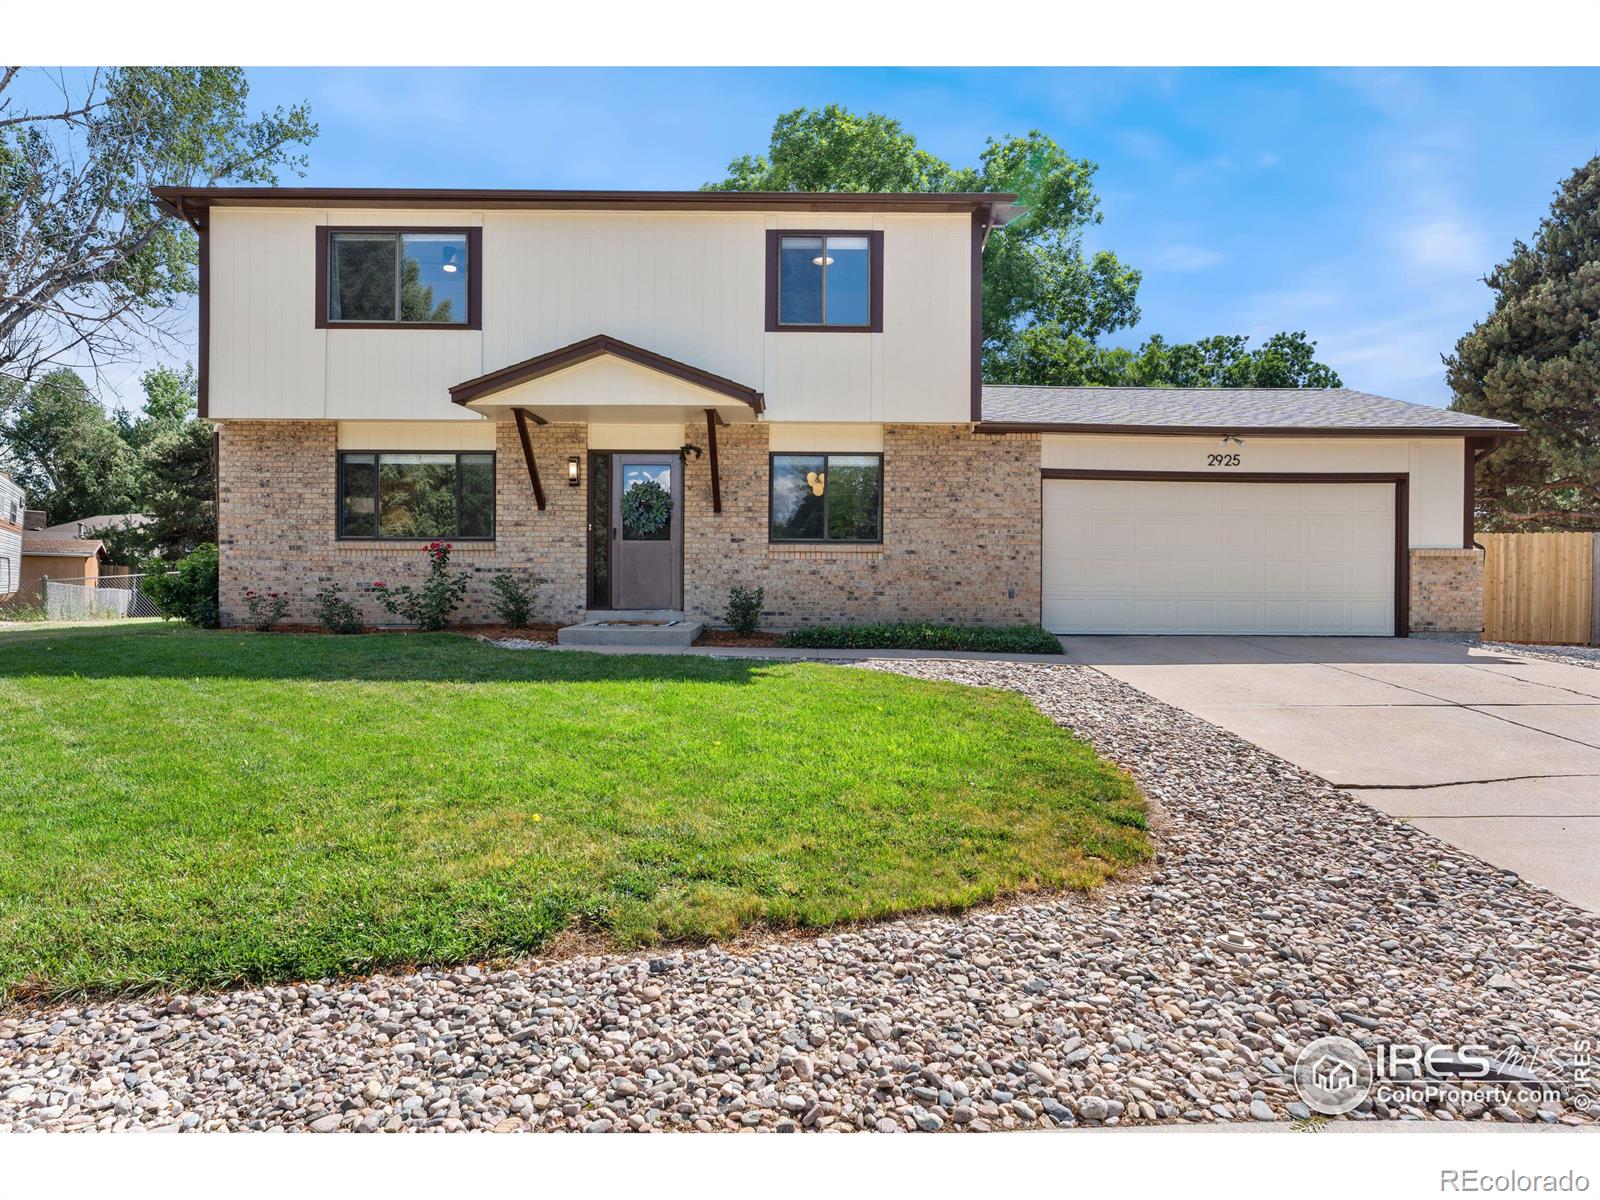 2925  Southmoor Drive, fort collins MLS: 4567891013600 Beds: 4 Baths: 3 Price: $615,000